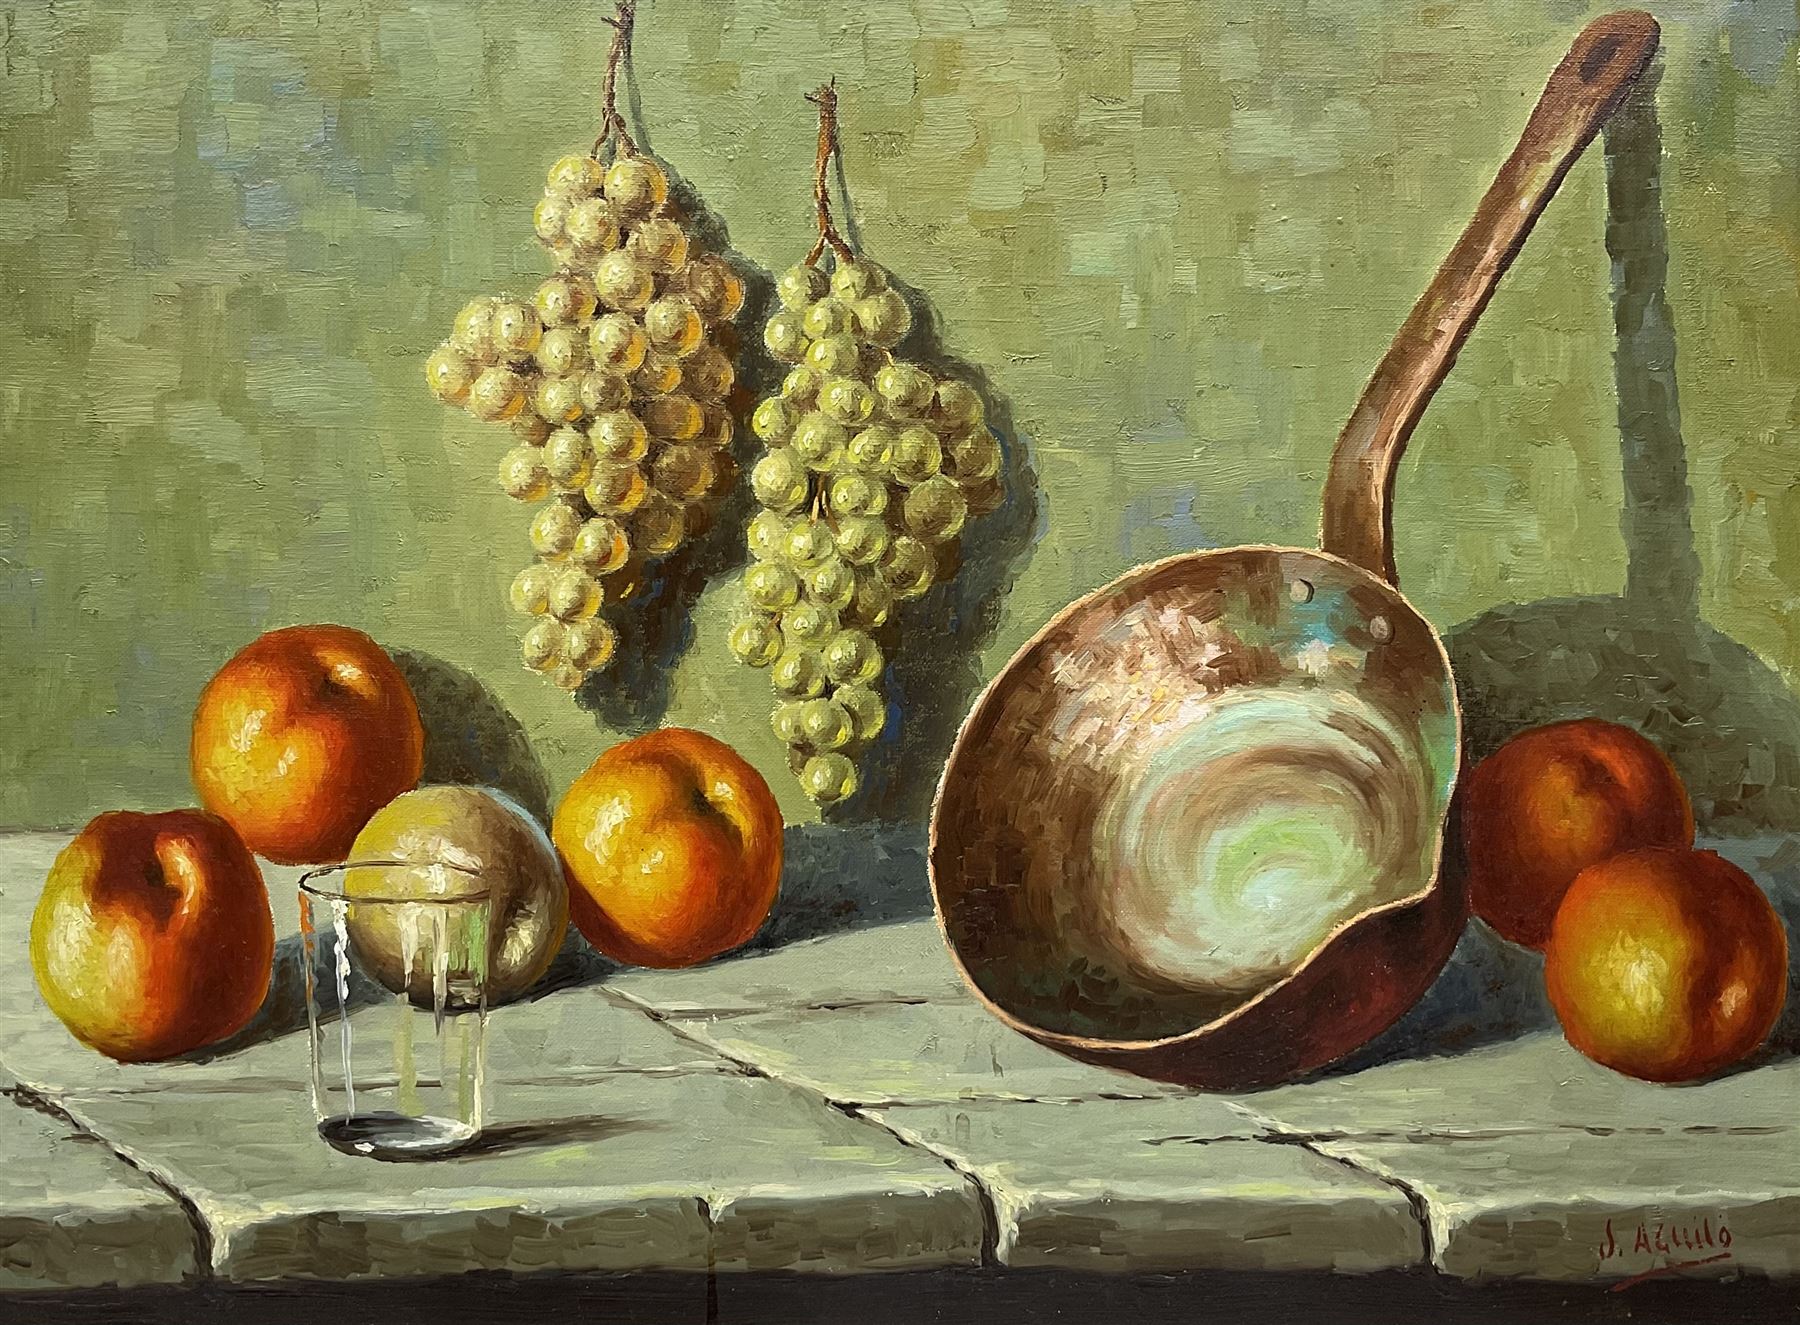 S Aguilo (Continental Mid-20th century): Still Life of Fruit on a Ledge